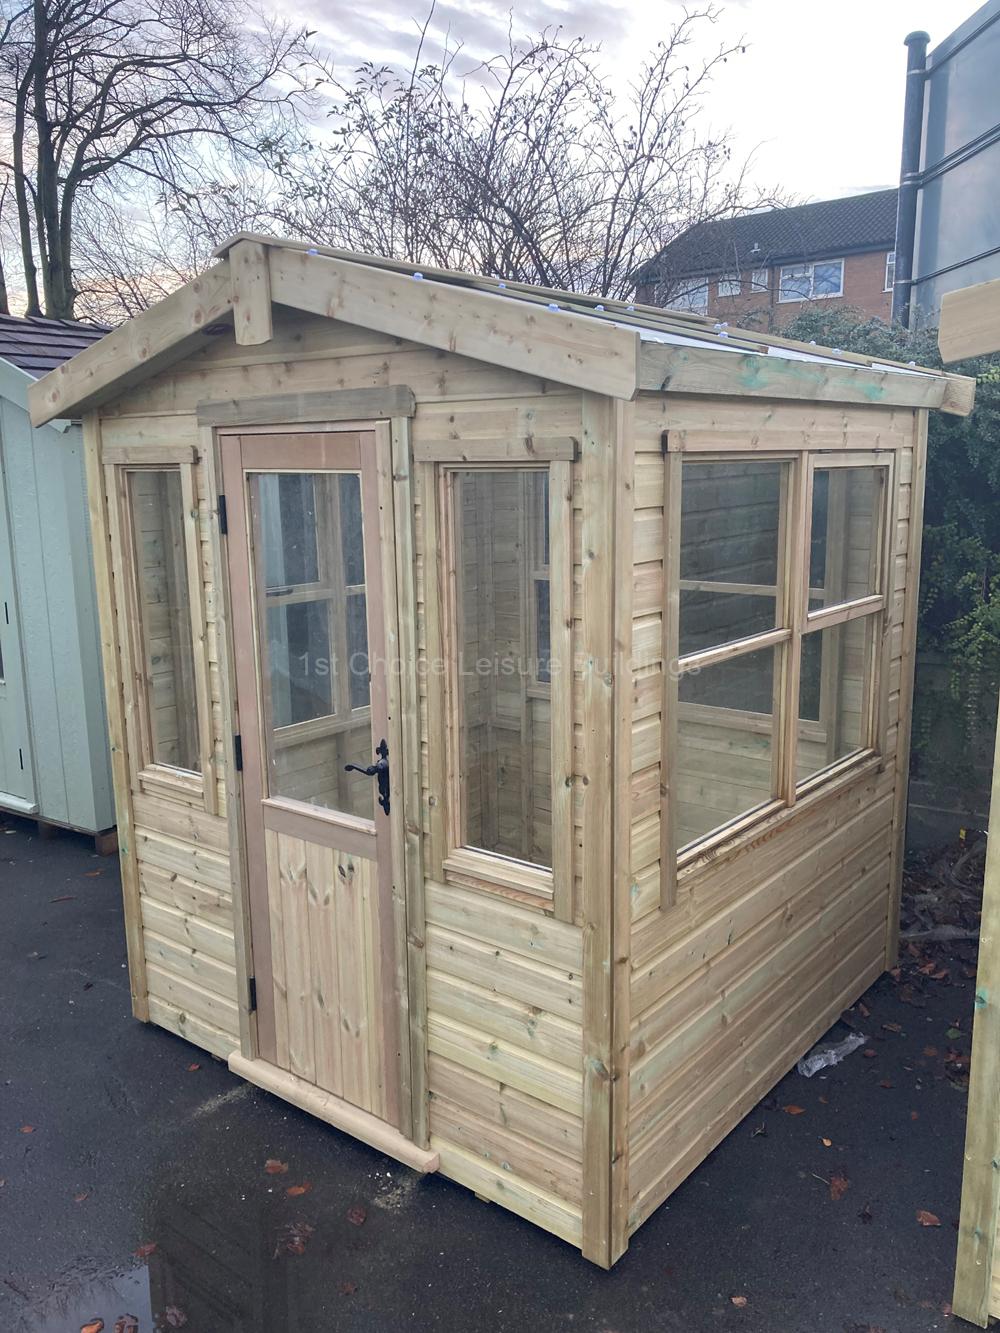 1st Choice Platinum Wheatley Pressure Treated Apex Wooden Greenhouse With Free Assembly 4